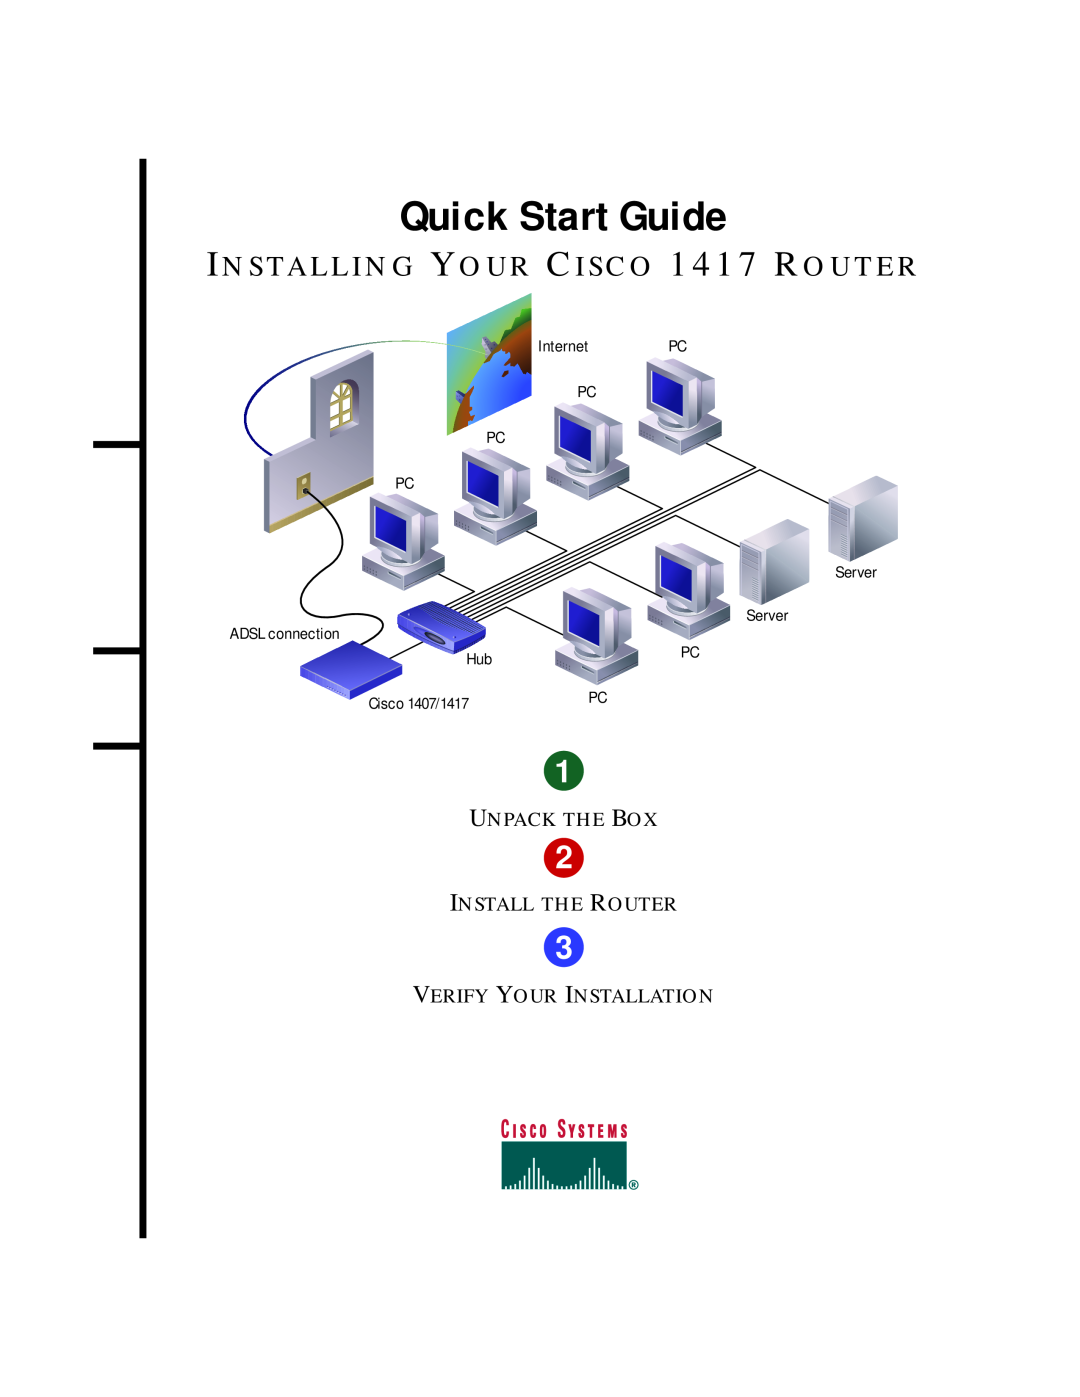 Cisco Systems quick start Quick Start Guide, IN S TA L L I N G YO U R CI S C O 1417 RO U T E R, Unpack The Box 